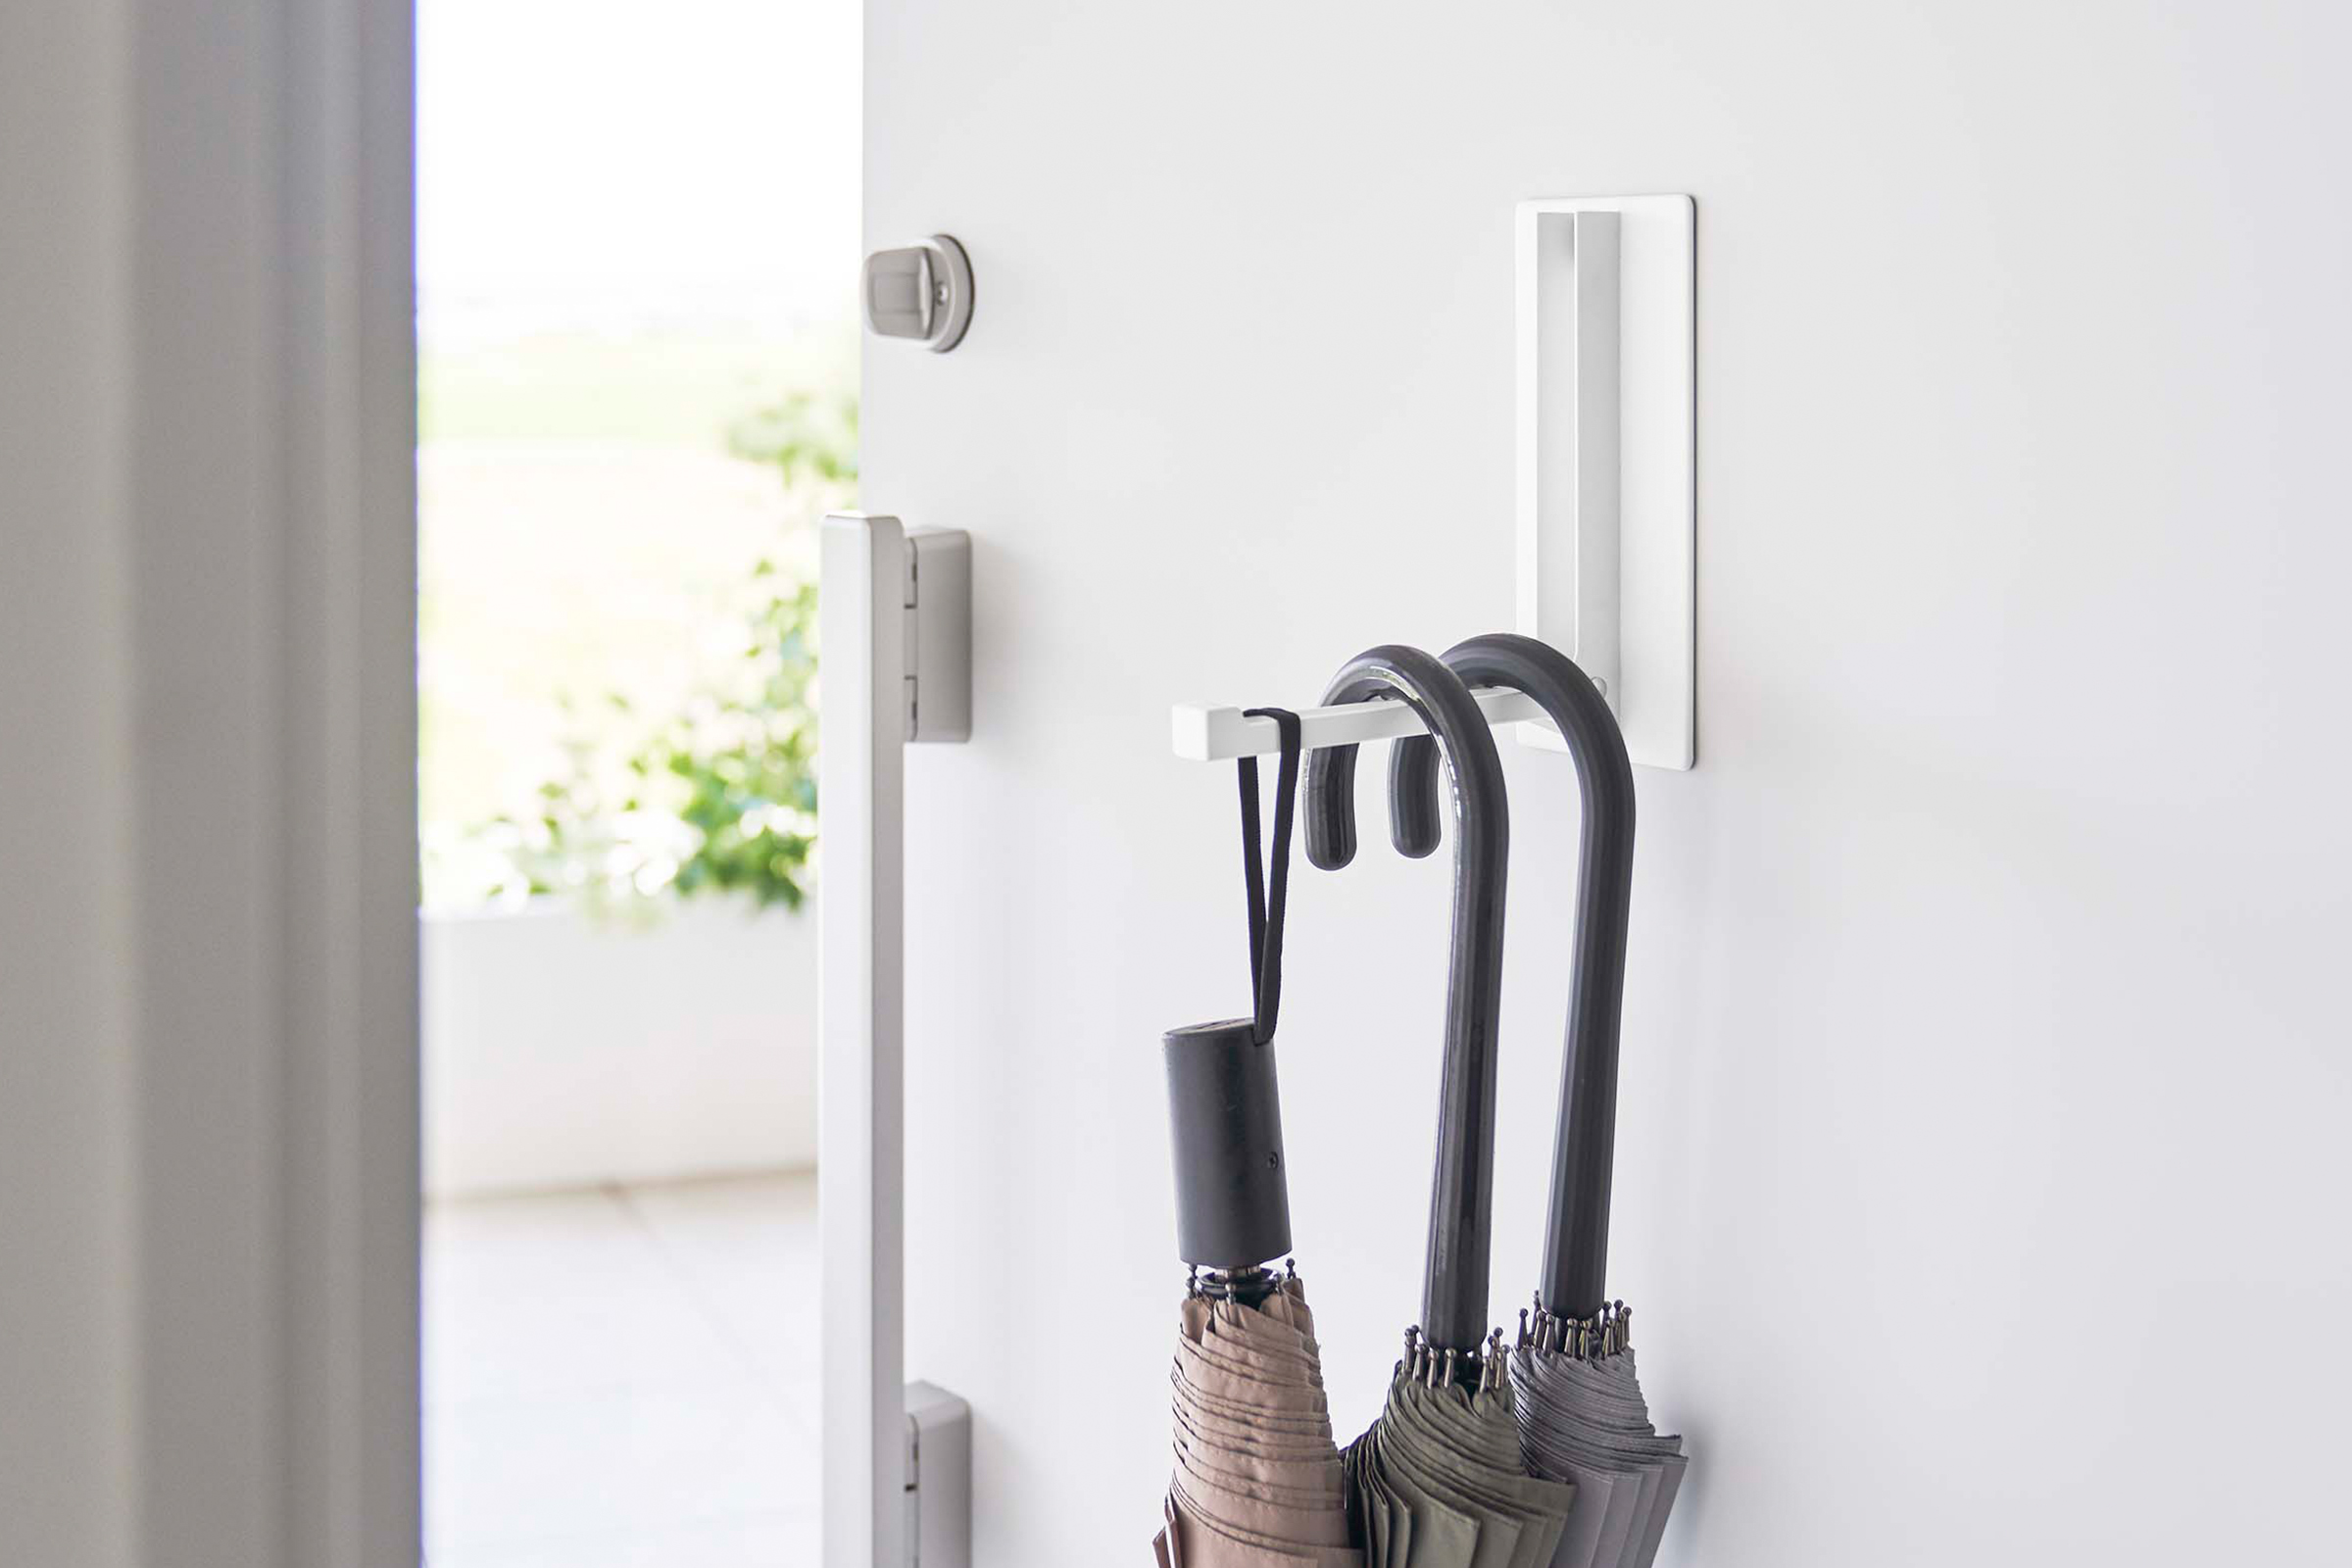 A sleek white metal hook, seamlessly mounted on the back of a door, boasts a retractable design that can conveniently accommodate three umbrellas, maximizing space utilization.